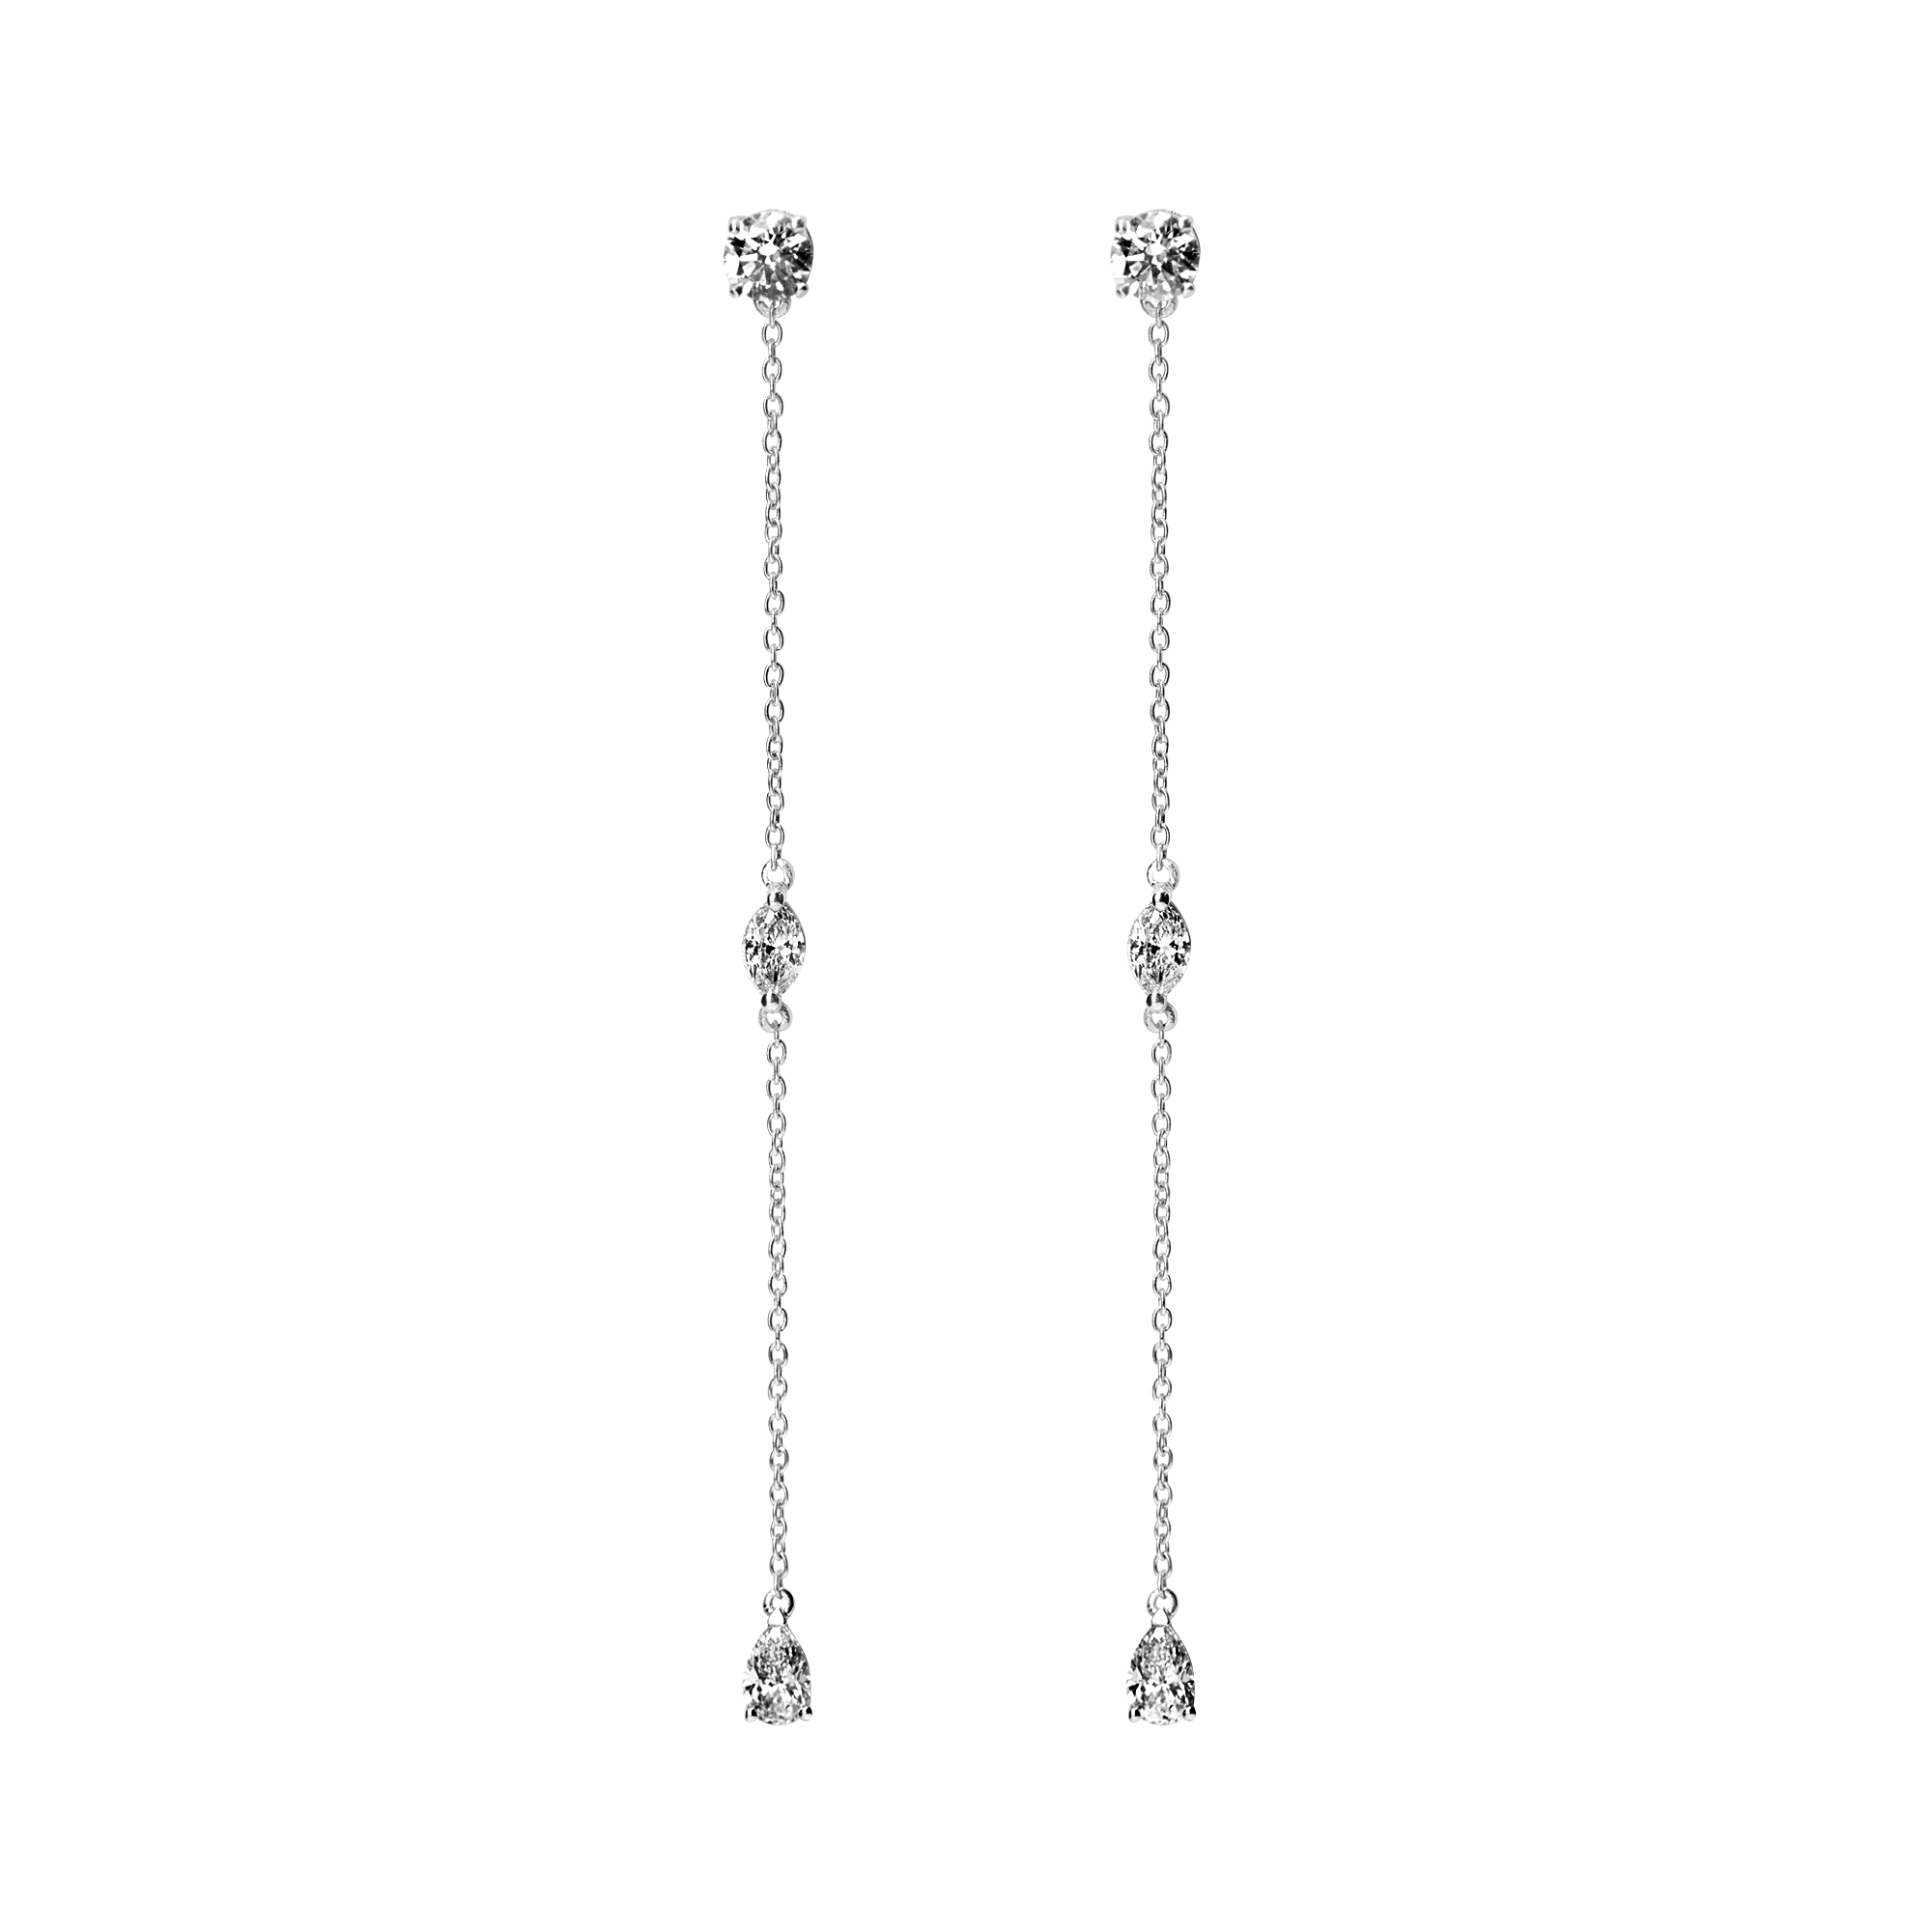 Full of movement, these hanging diamond Lariat earrings are strung with 6 brilliant diamonds totaling 1.2 carat, each of which is separated by 1 inch of recycled 18k gold. Pair with other pieces in the Lariat collection: Lariat Deux, and the Lariat necklace. Sold as a pair.